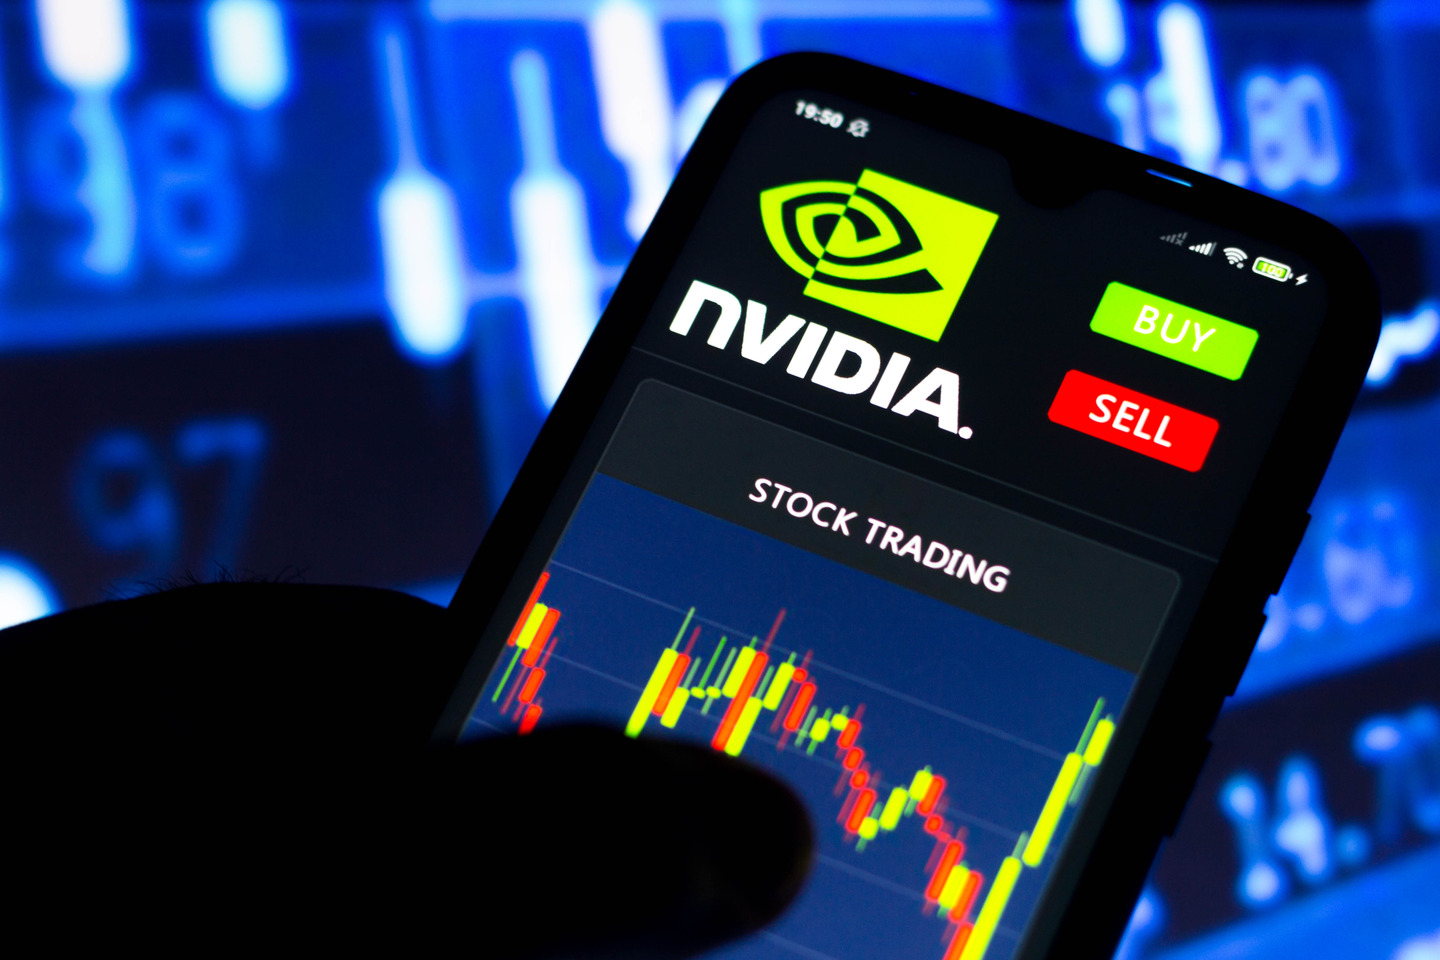 Nvidia AI chips have powered thte company to a record year.